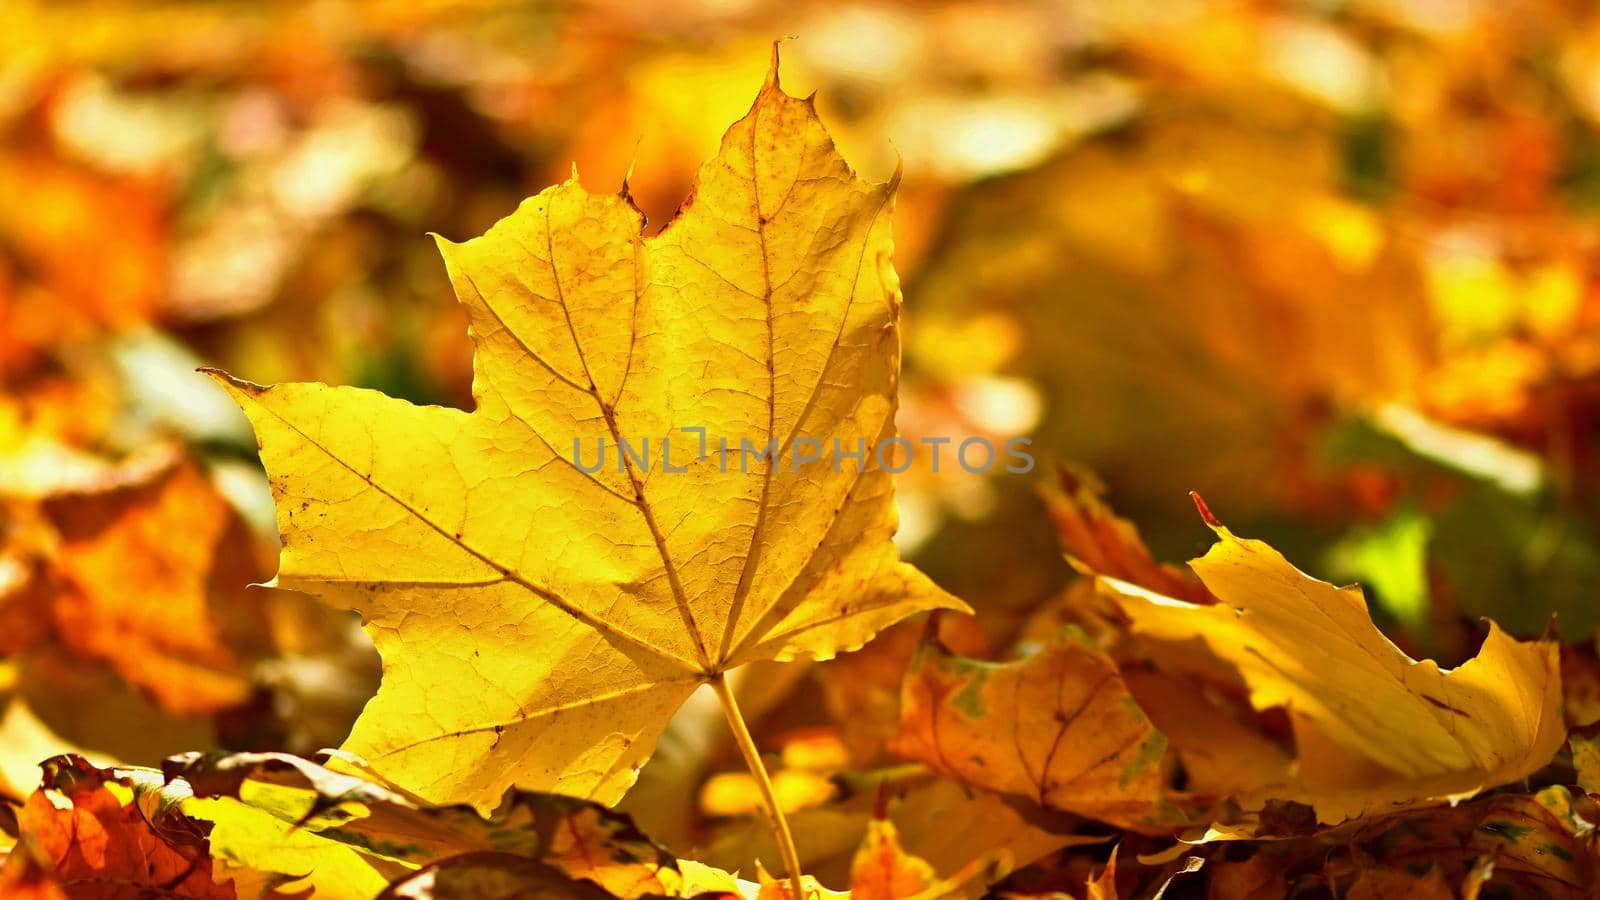 Autumn. Beautiful colorful leaves on trees in autumn time. Natural seasonal color background.  by Montypeter